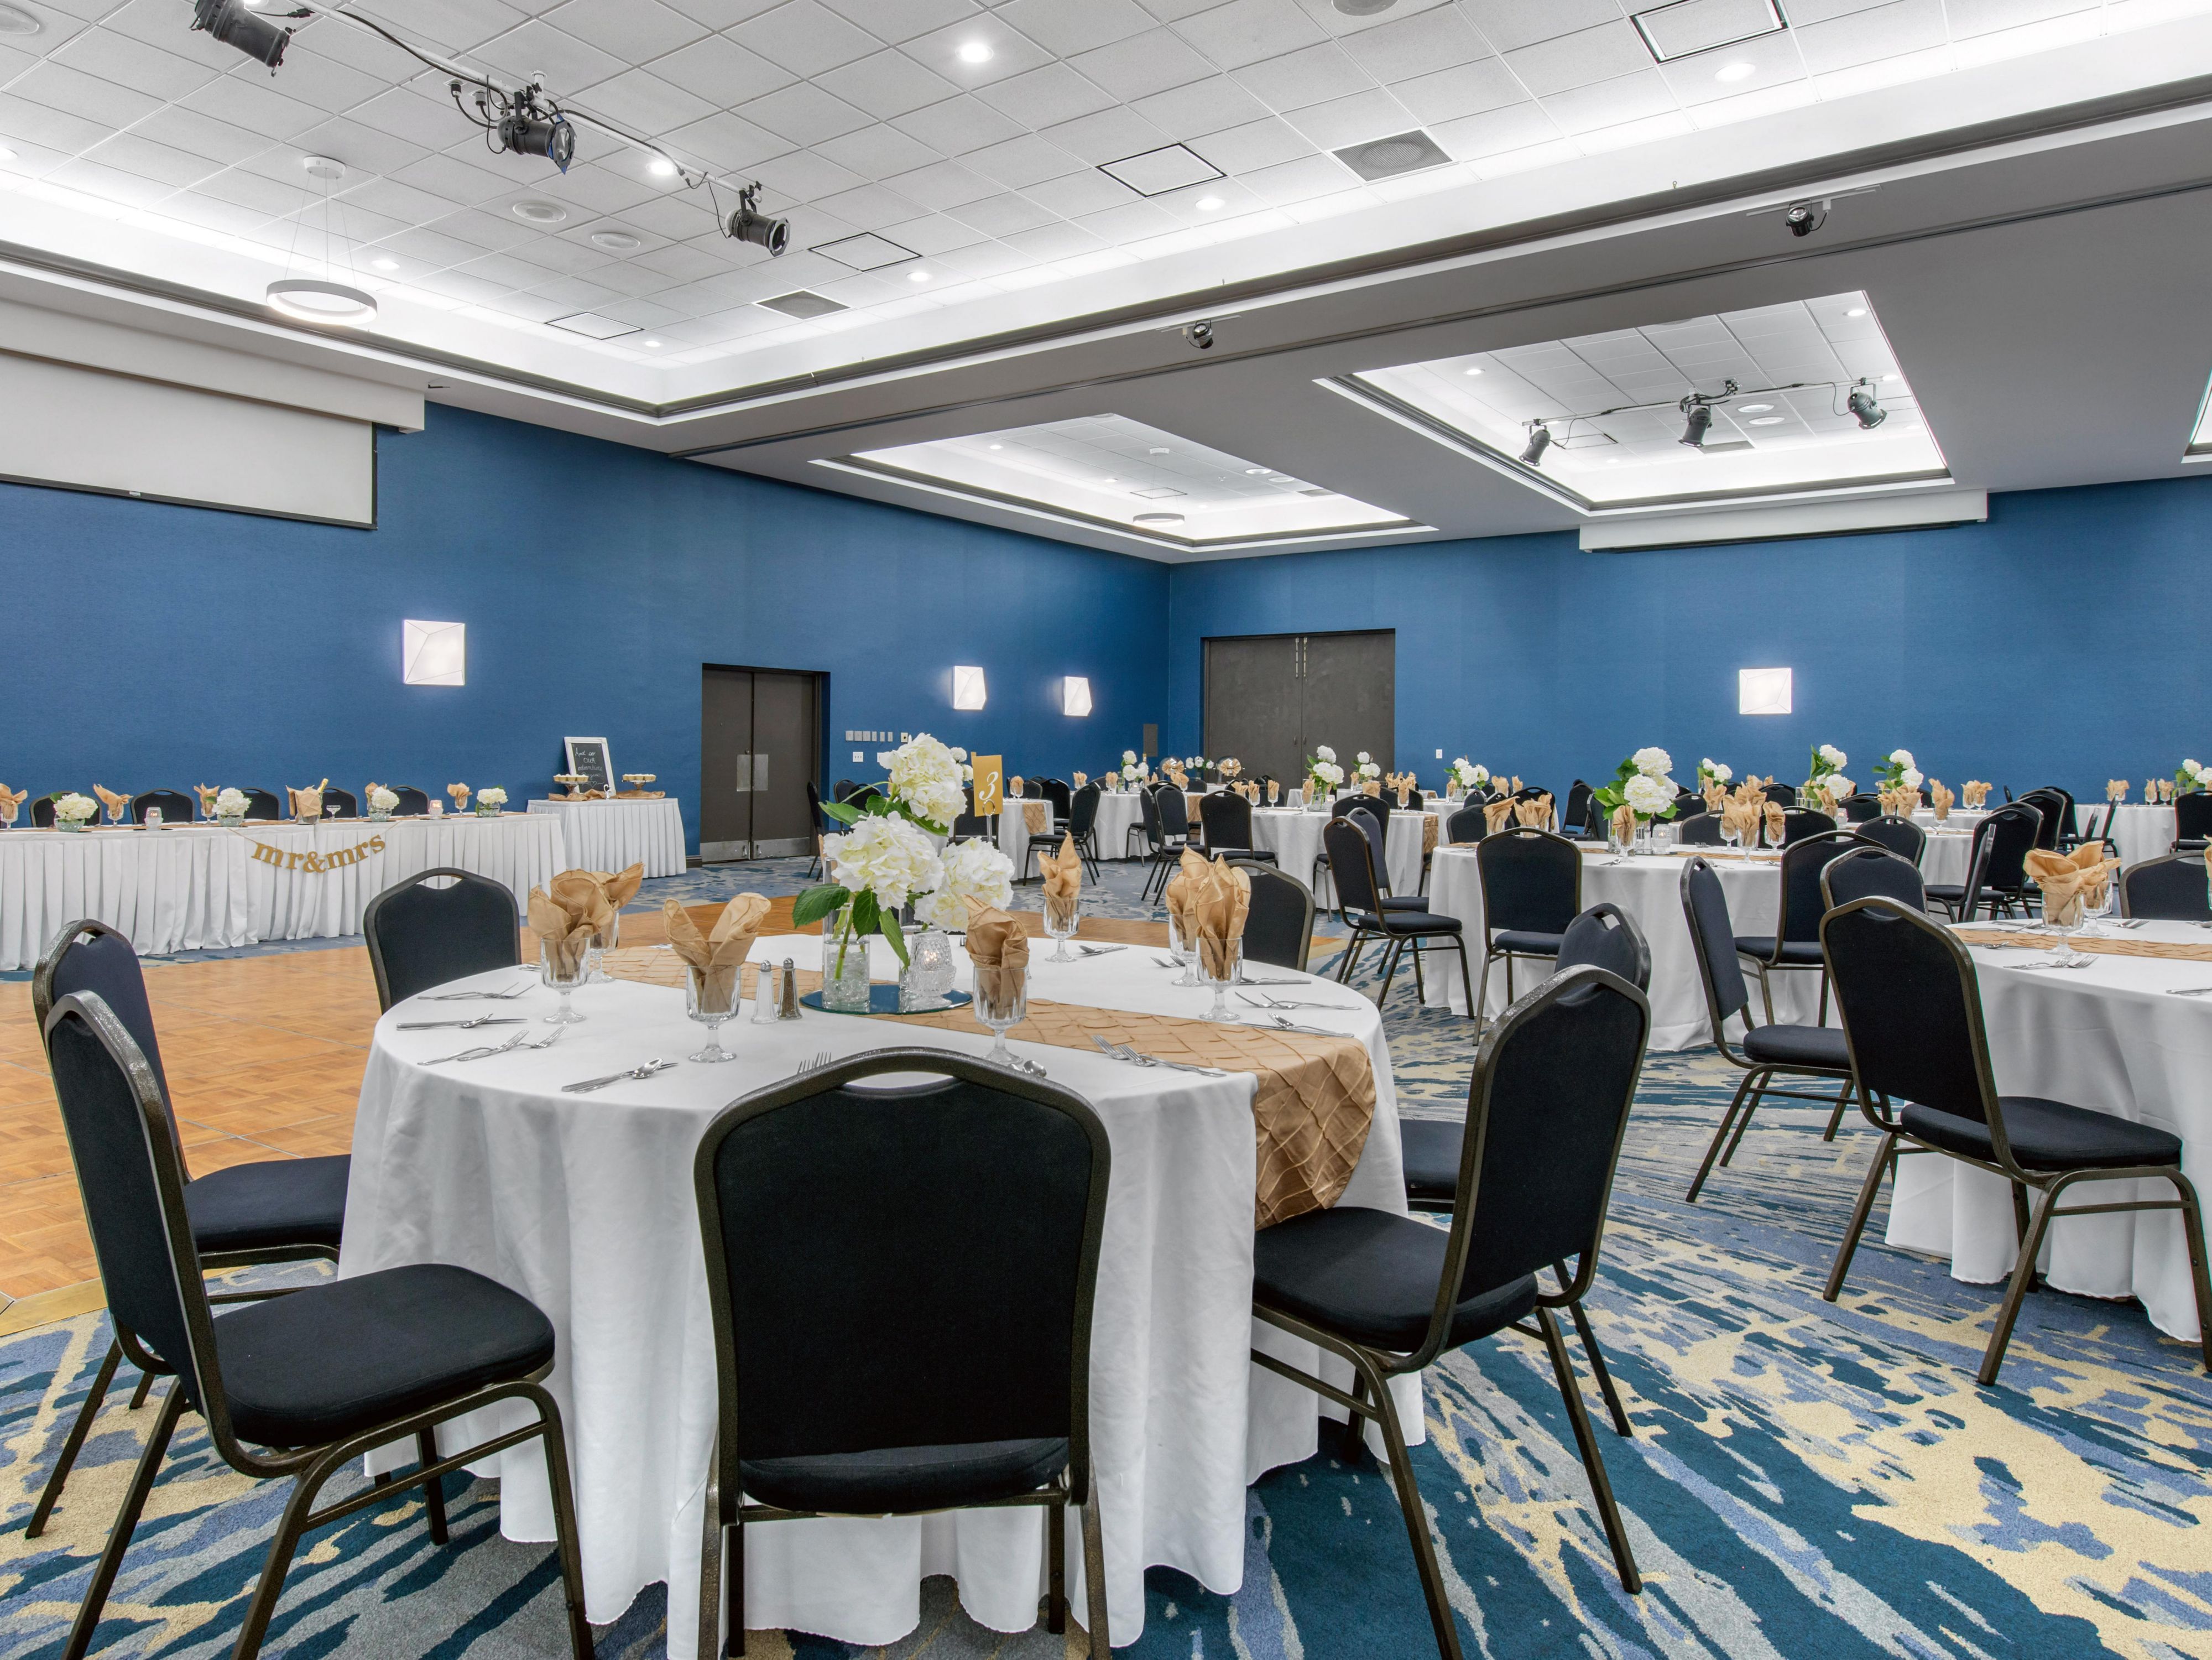 Whether you’re planning a business conference, reunion, or wedding celebration, we offer 7,800 square feet of meeting and event space. Our catering and banquet team will provide your group with all that you need to make your event successful.